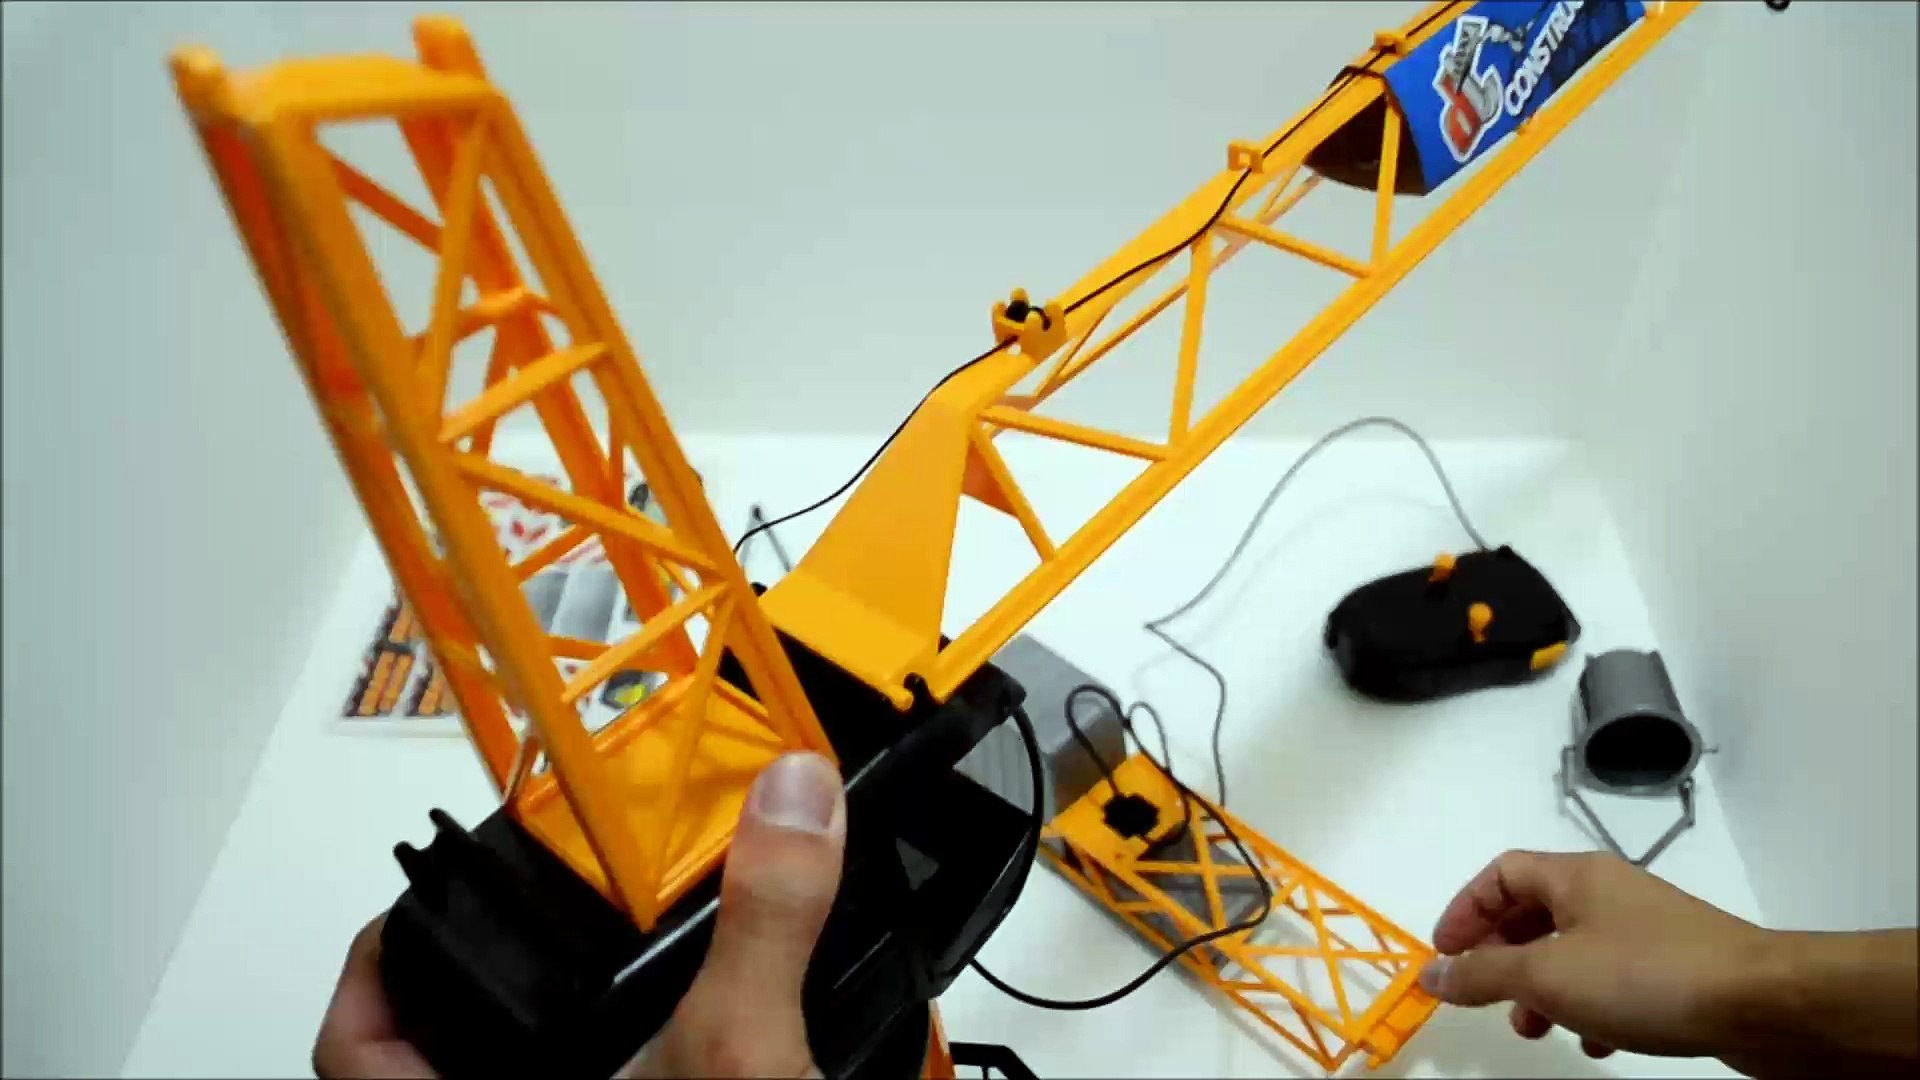 Dickie Toys 48" and 40" Mega Crane Truck Vehicle Playset Review Testing  GIANT WORLD - video Dailymotion